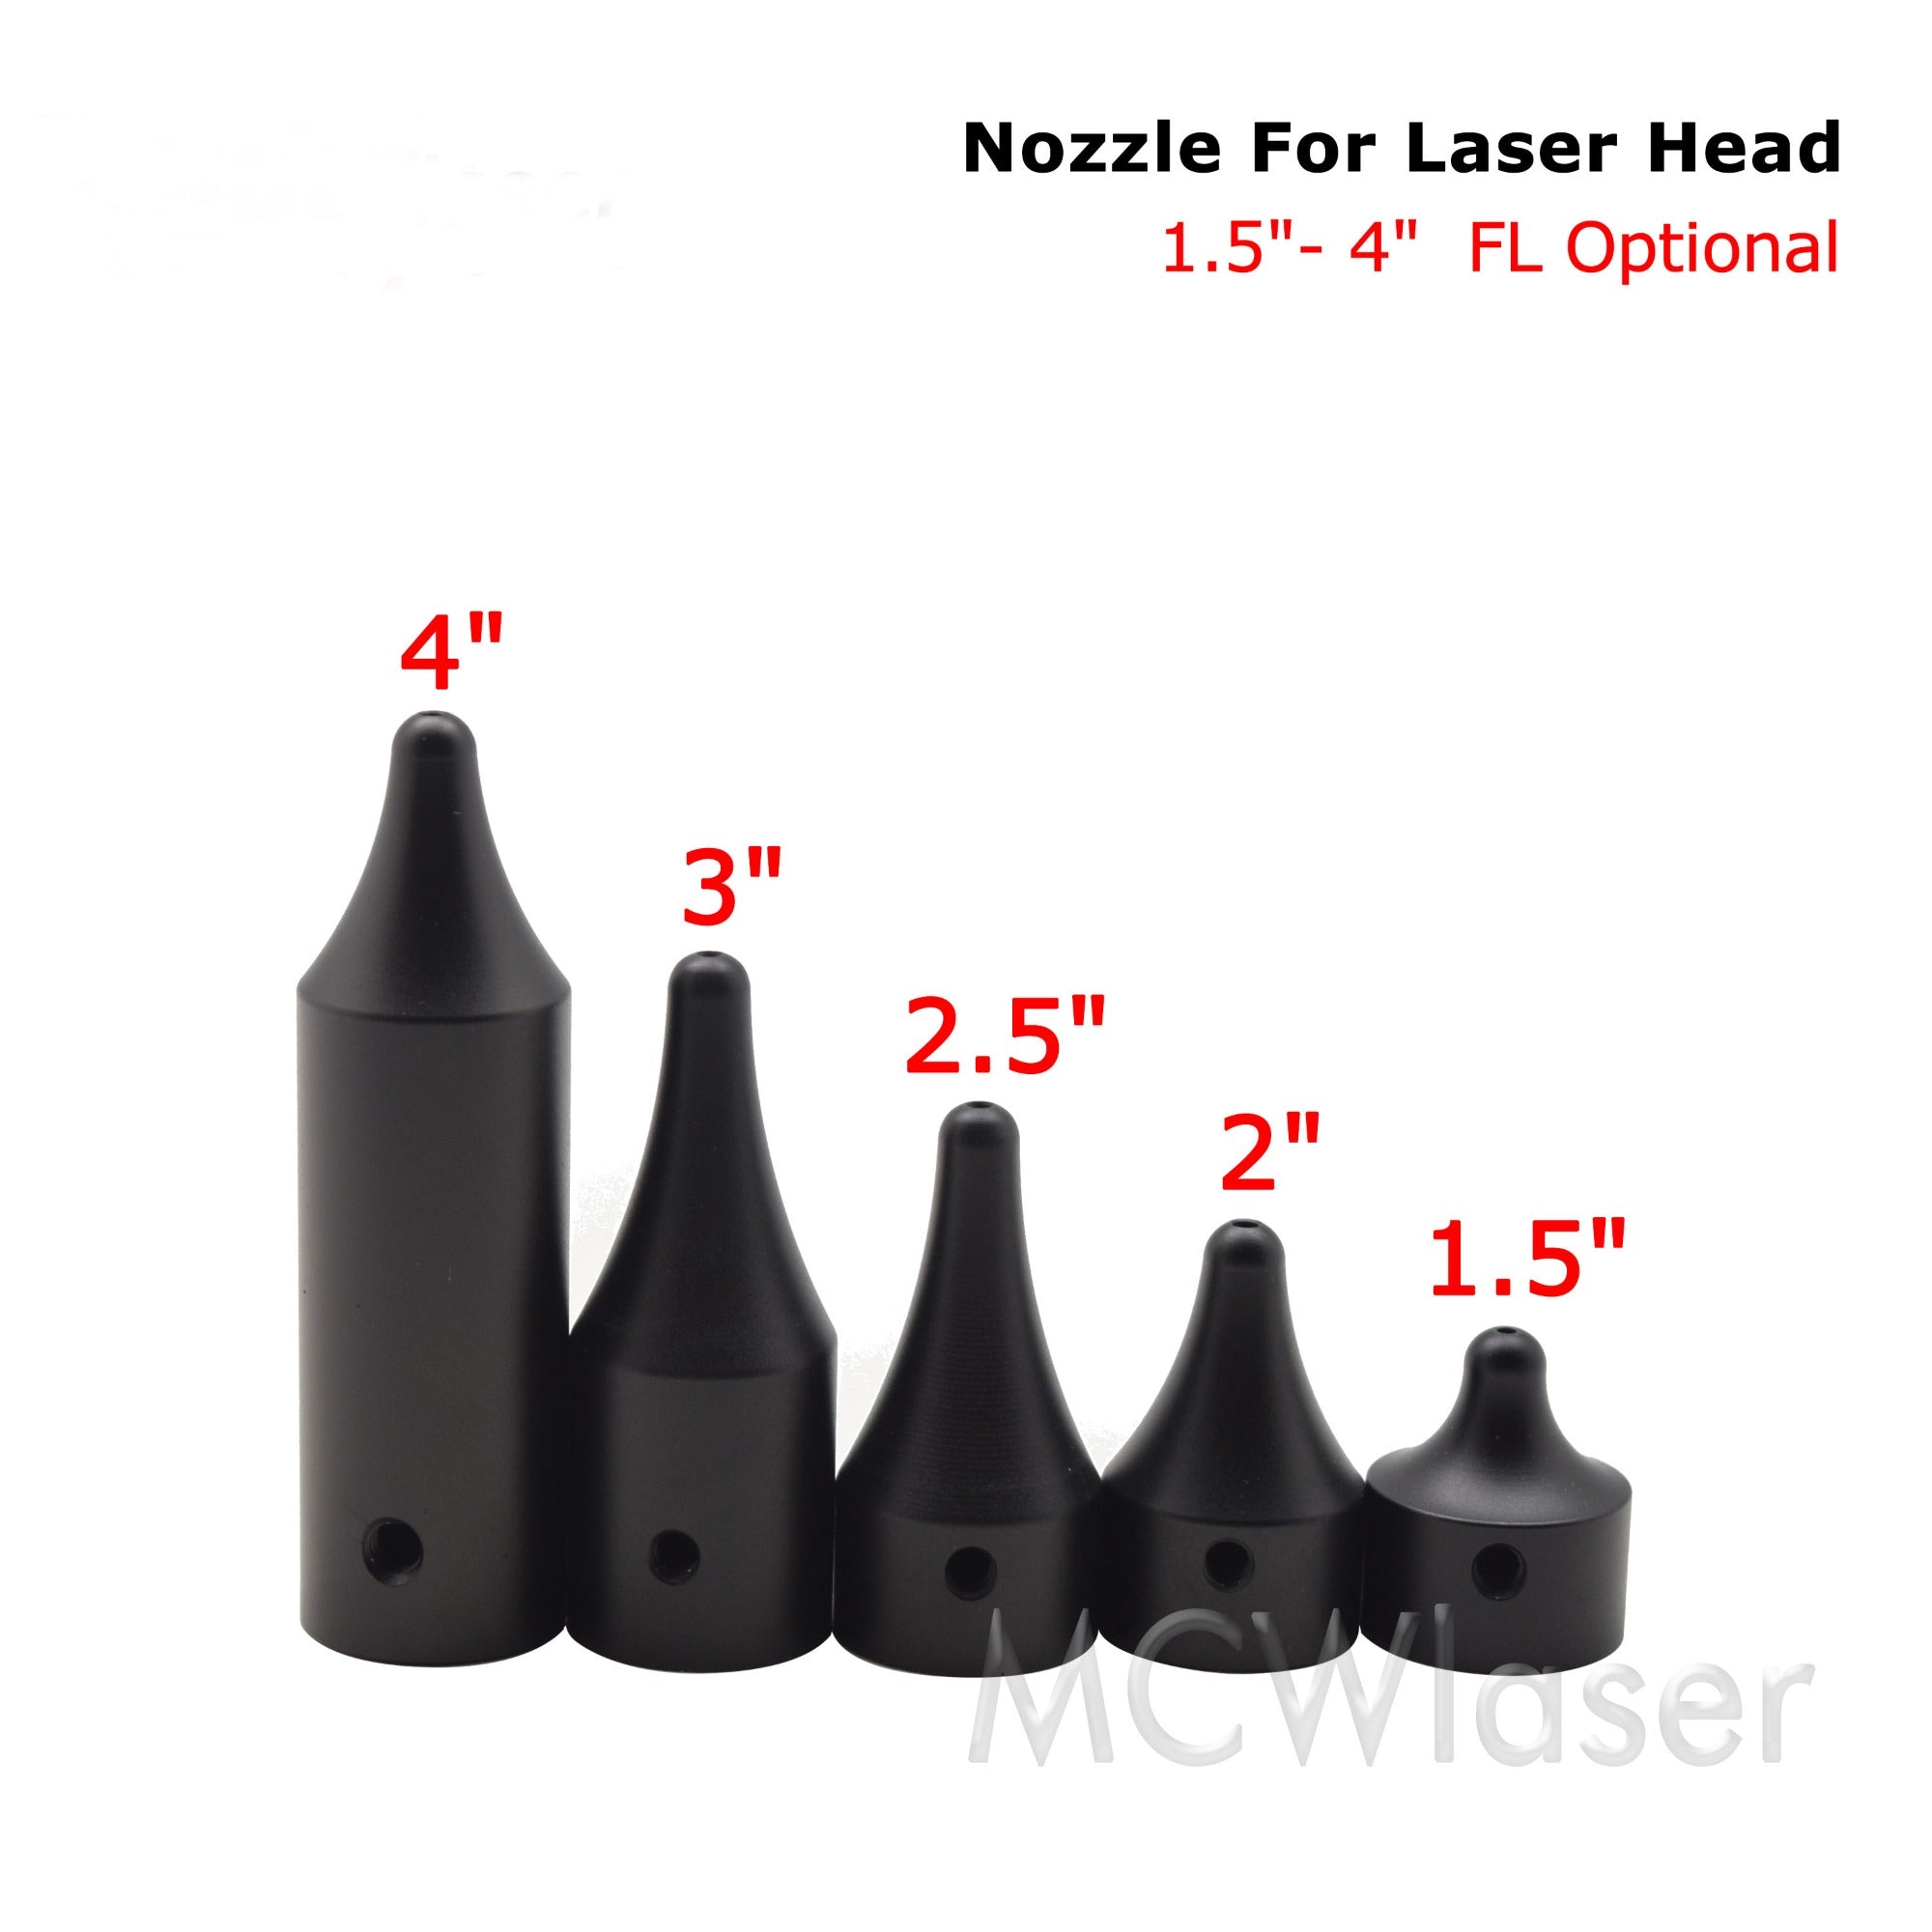 MCWlaser Laser Head Nozzle For CO2 Laser Engraving Cutting Machine